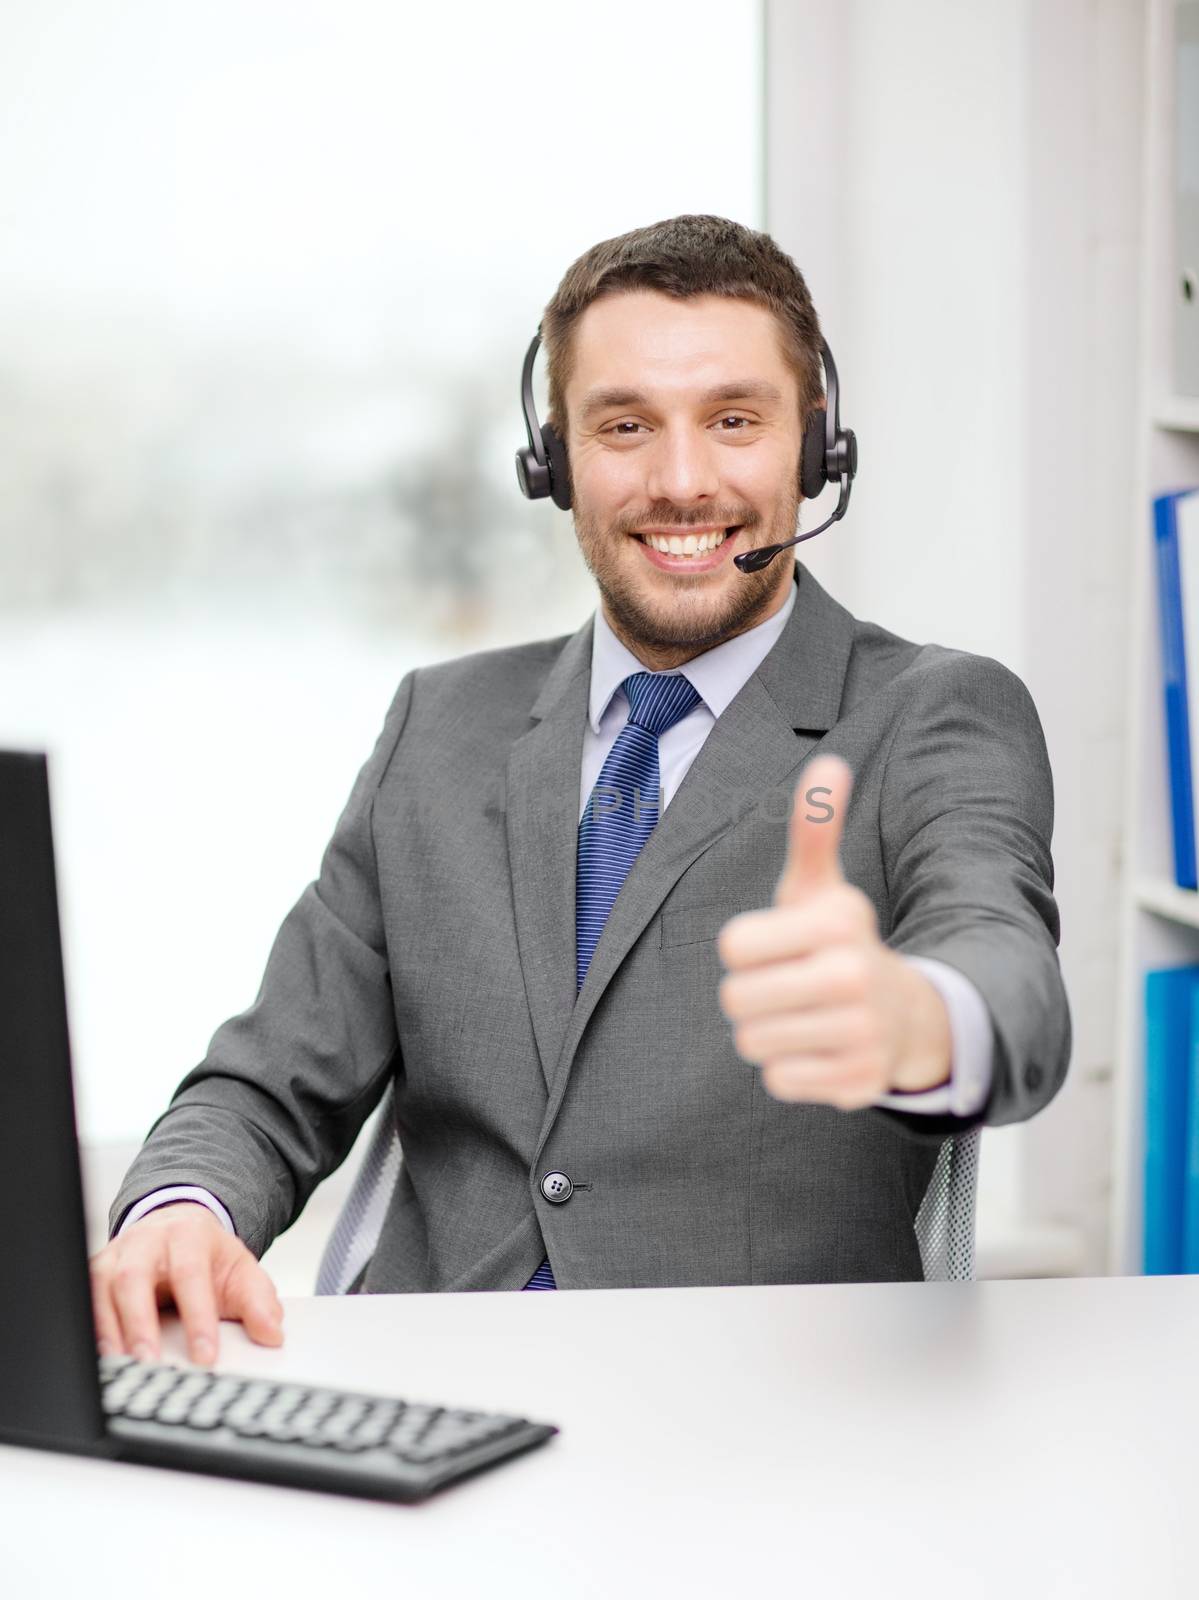 business, communication and technology concept - friendly male helpline operator with headphones and computer at call center showing thumbs up